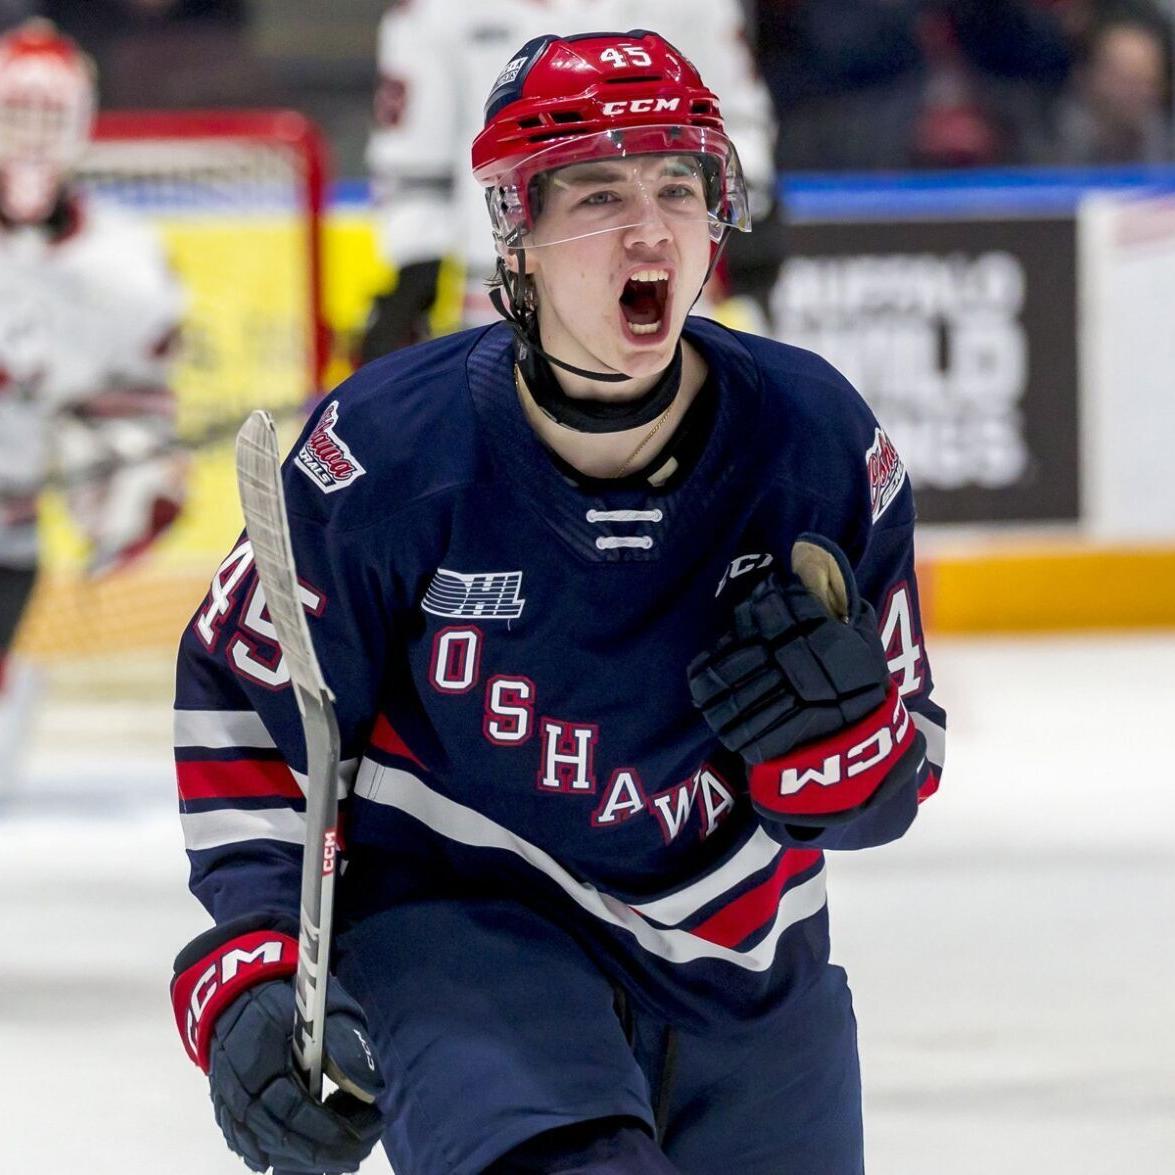 Future Generals camp is only 10 days away! - Oshawa Generals